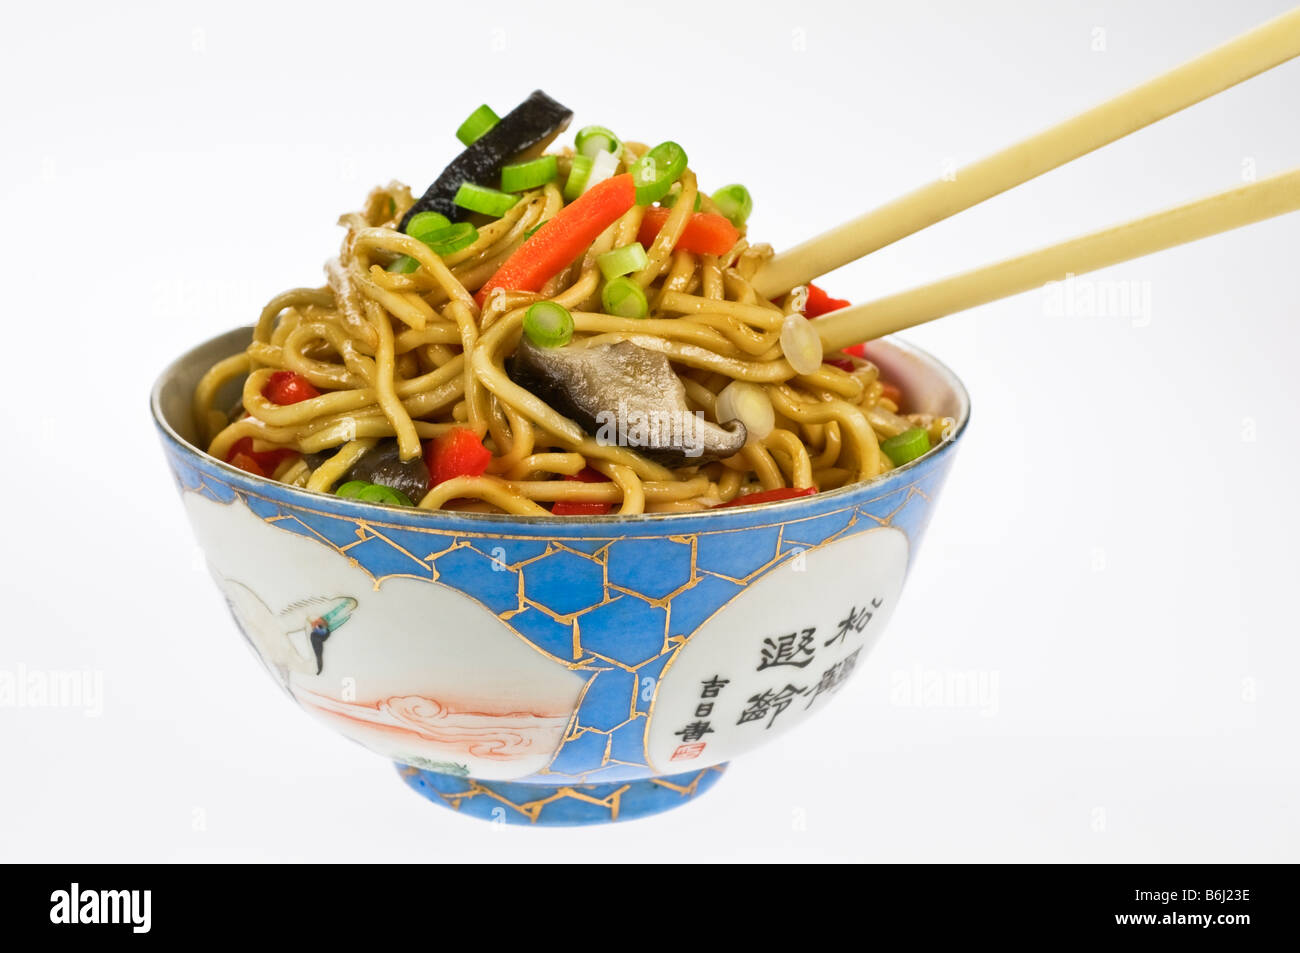 Les aliments chinois chow mein Banque D'Images